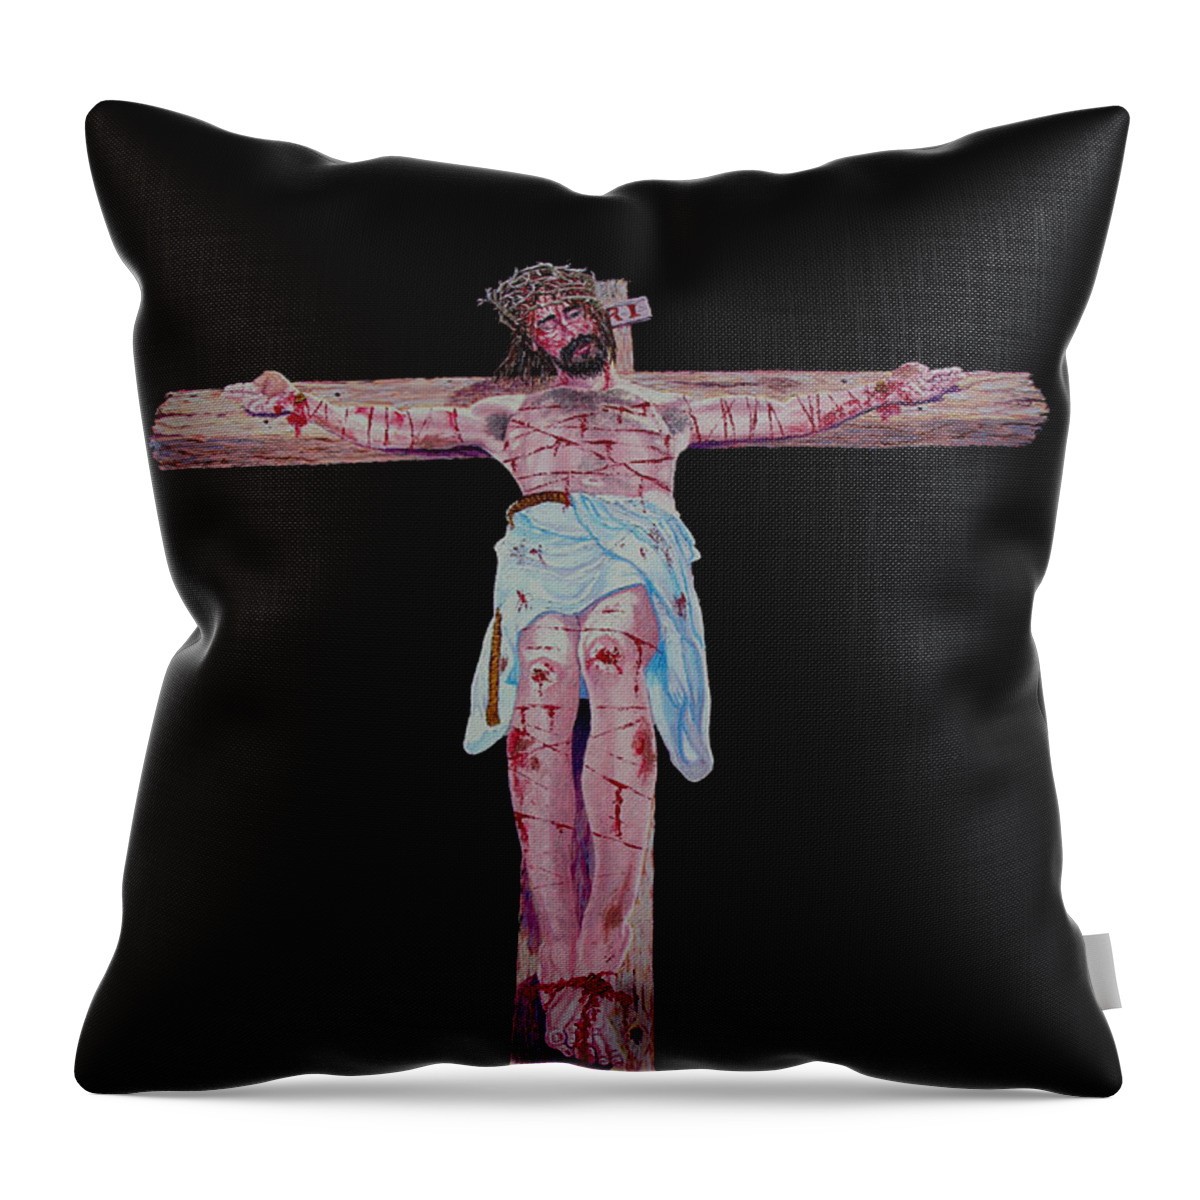 Crucifixion Throw Pillow featuring the painting The Crucifixion by Stan Hamilton